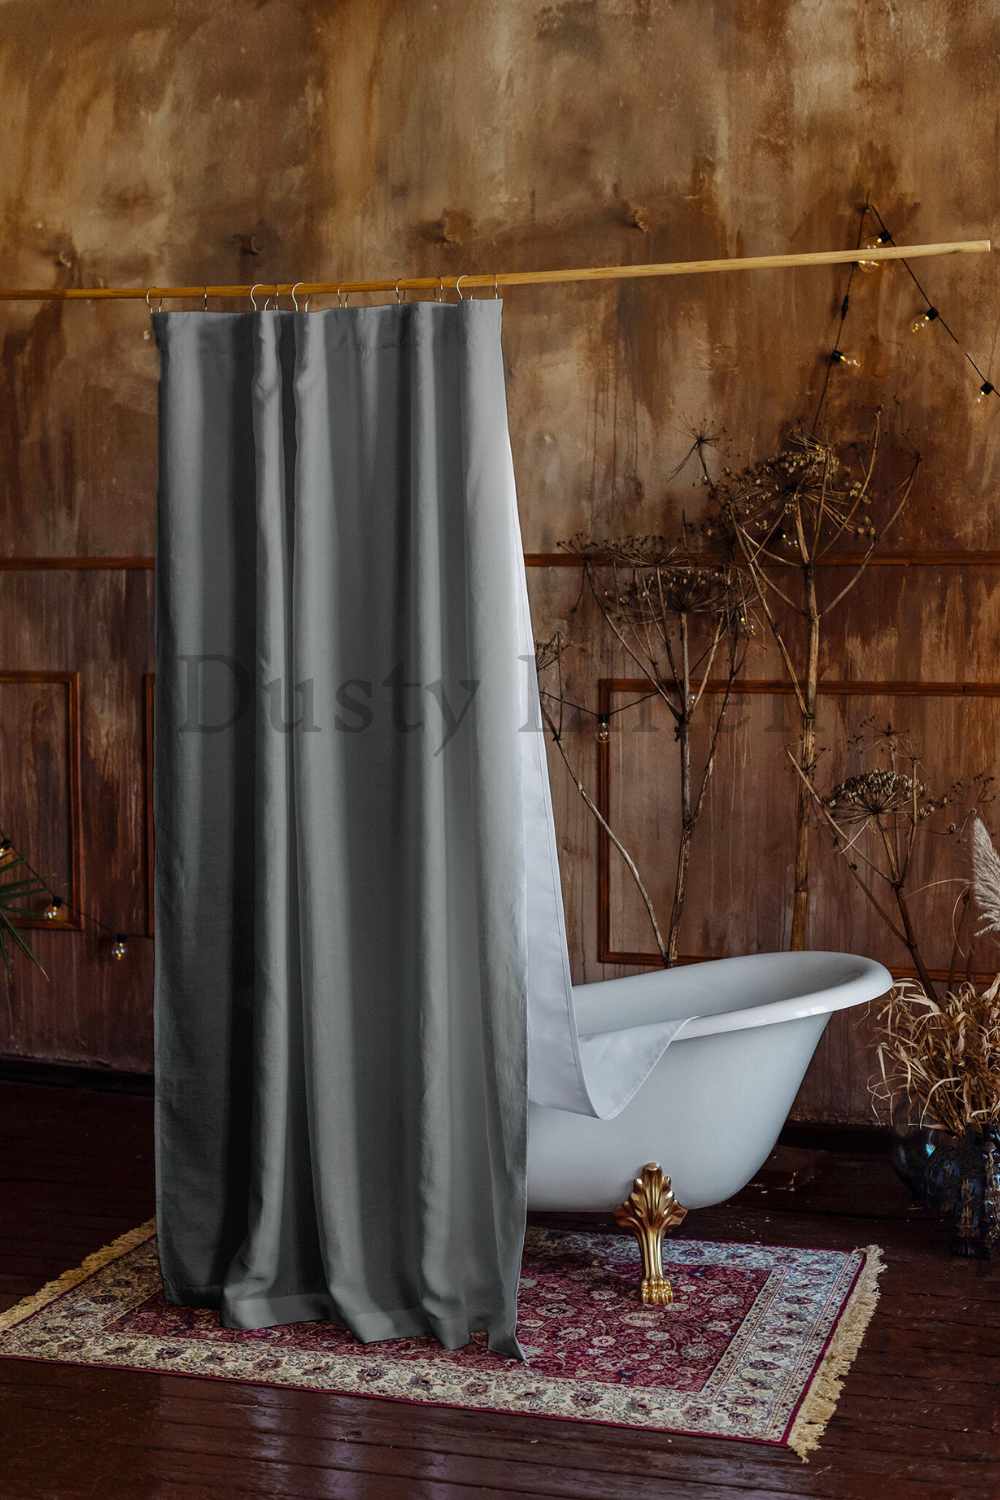 Dusty Linen made best selling gray / grey color linen bath curtain for rustic interior